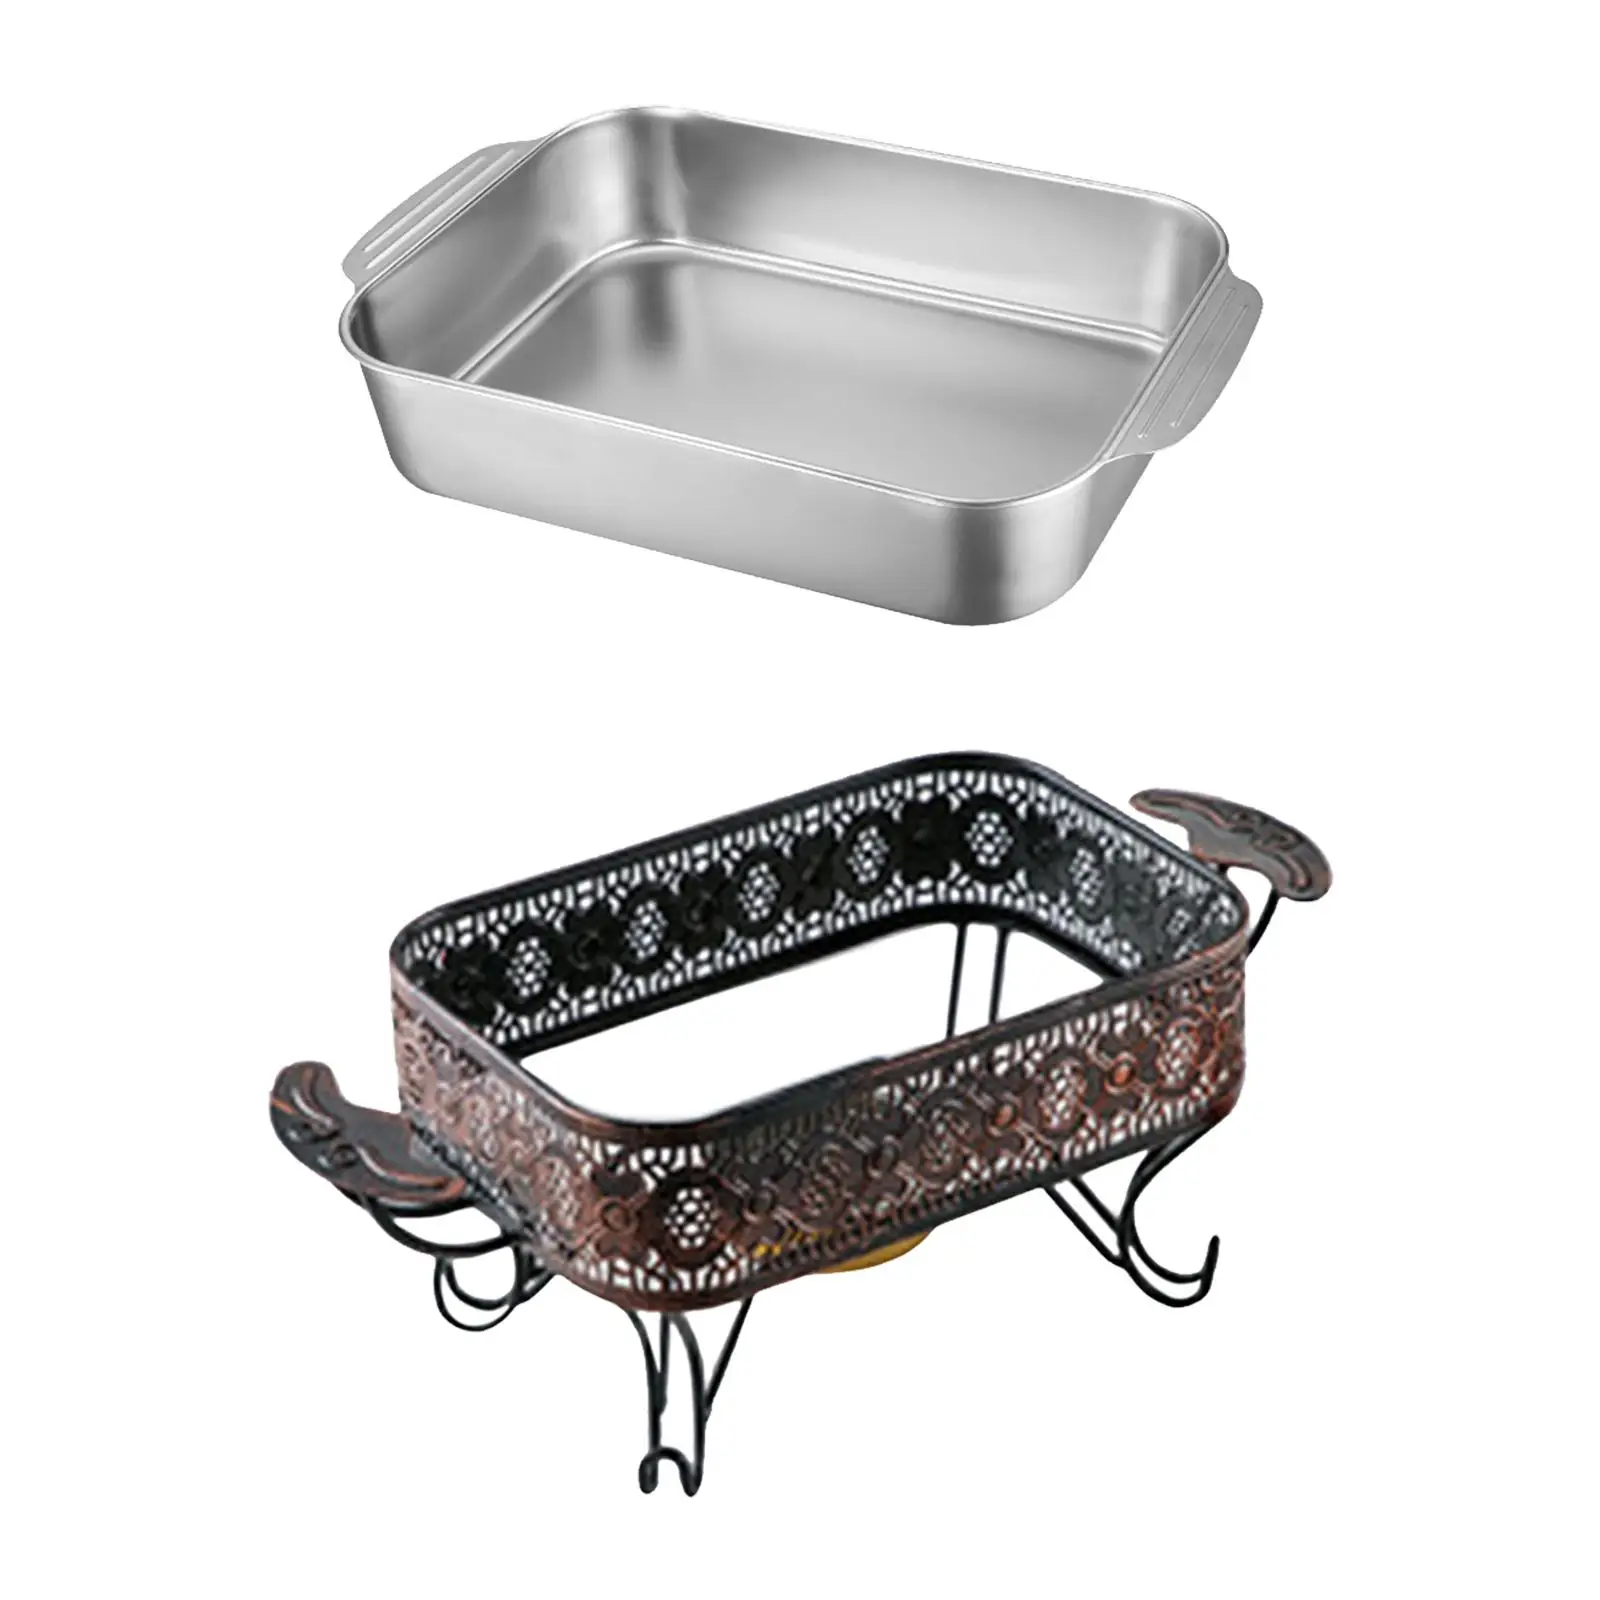 Rectangle Stainless Steel Fish Grill Roasting Pan with Handles Accessories Comfortable to Grip